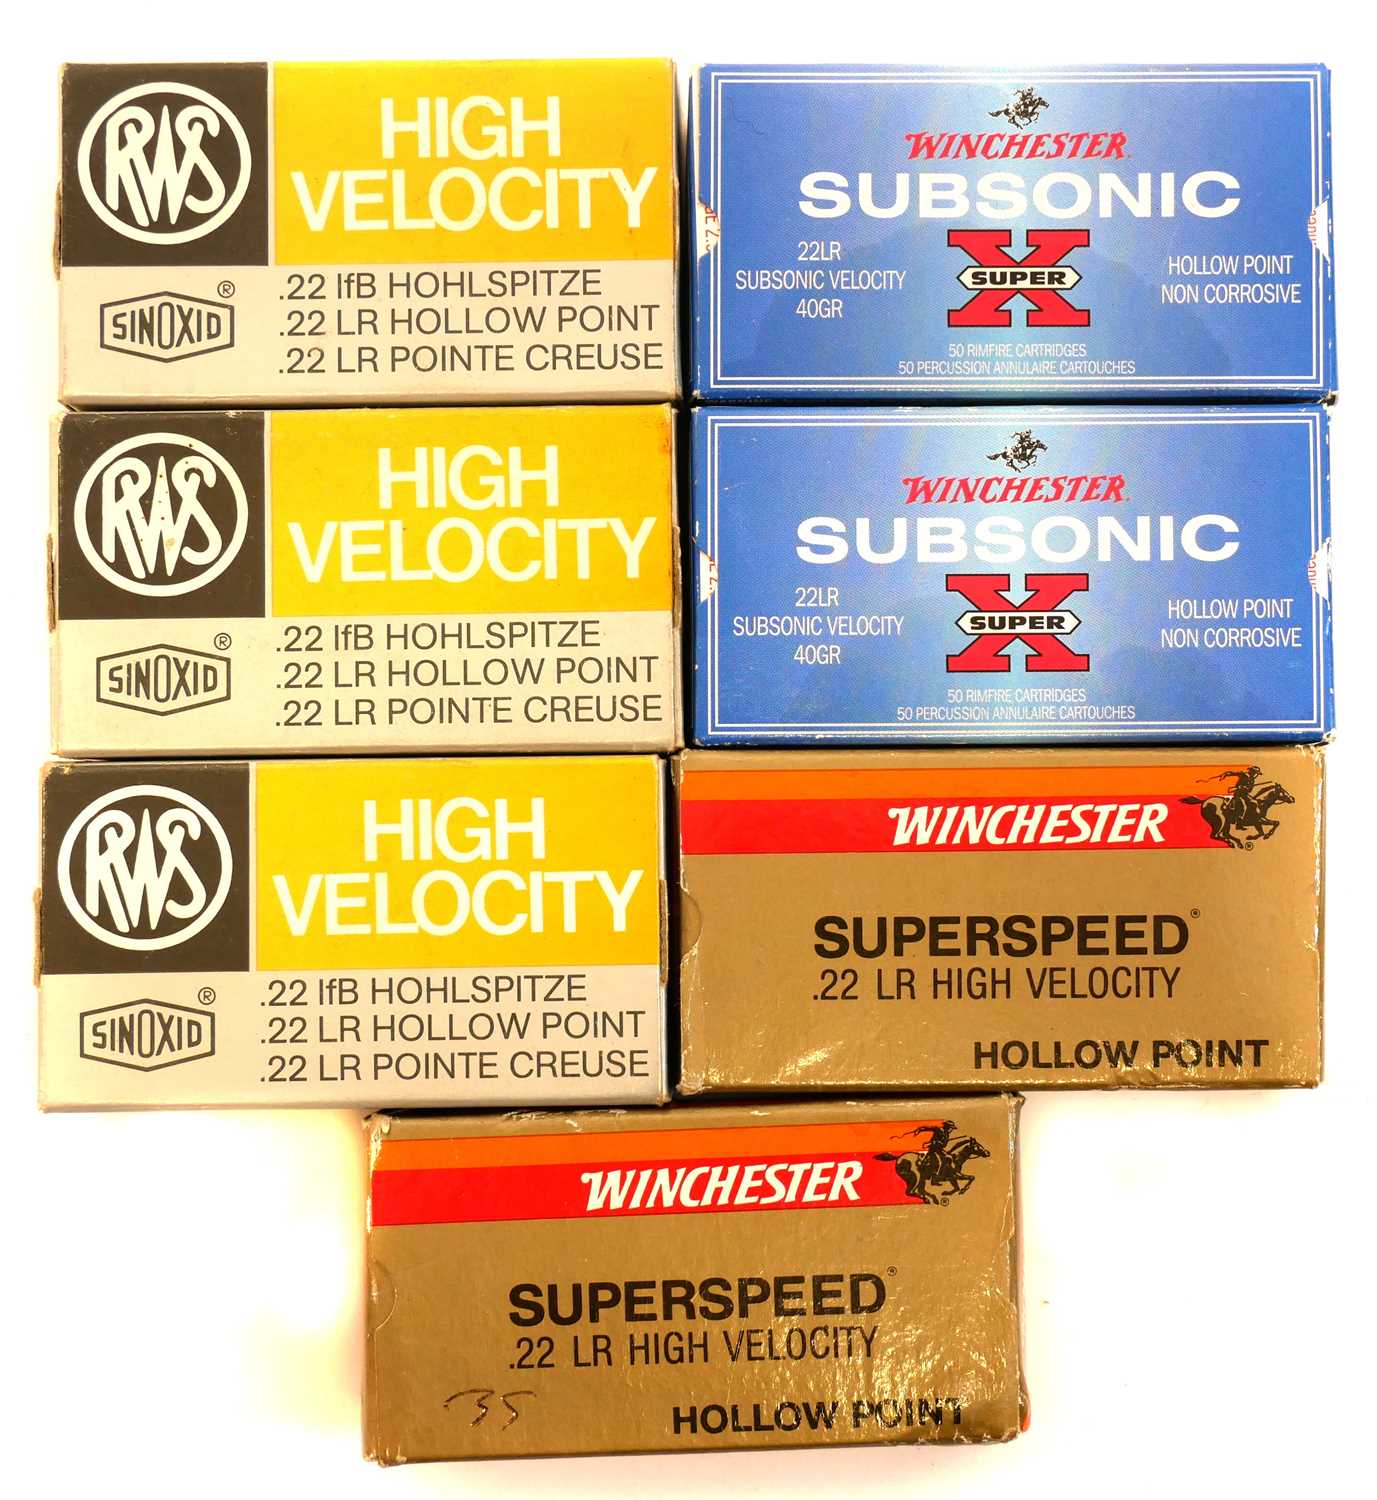 Collection of .22LR ammunition, to include 150 x RWS 100 x Winchester subsonic, and 85 x